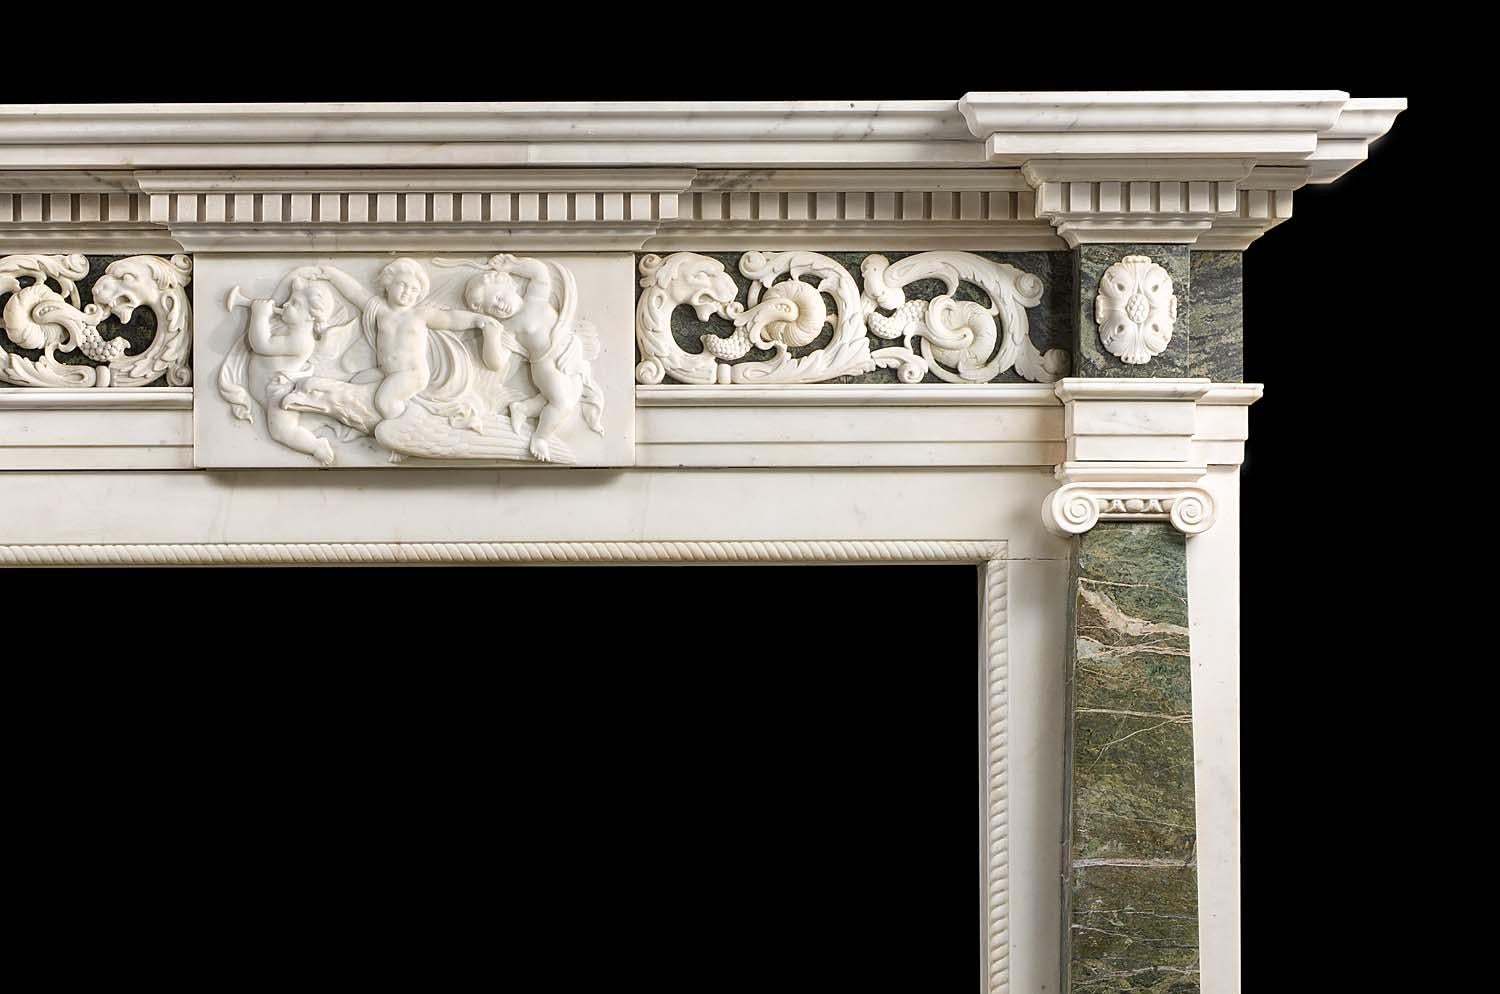 A large and imposing statuary and Connemara marble neoclassical style chimneypiece made in the Palladian manner. The wide stepped shelf rests above a band of substantial dentil carving, beneath which lies a Connemara marble frieze centred with a